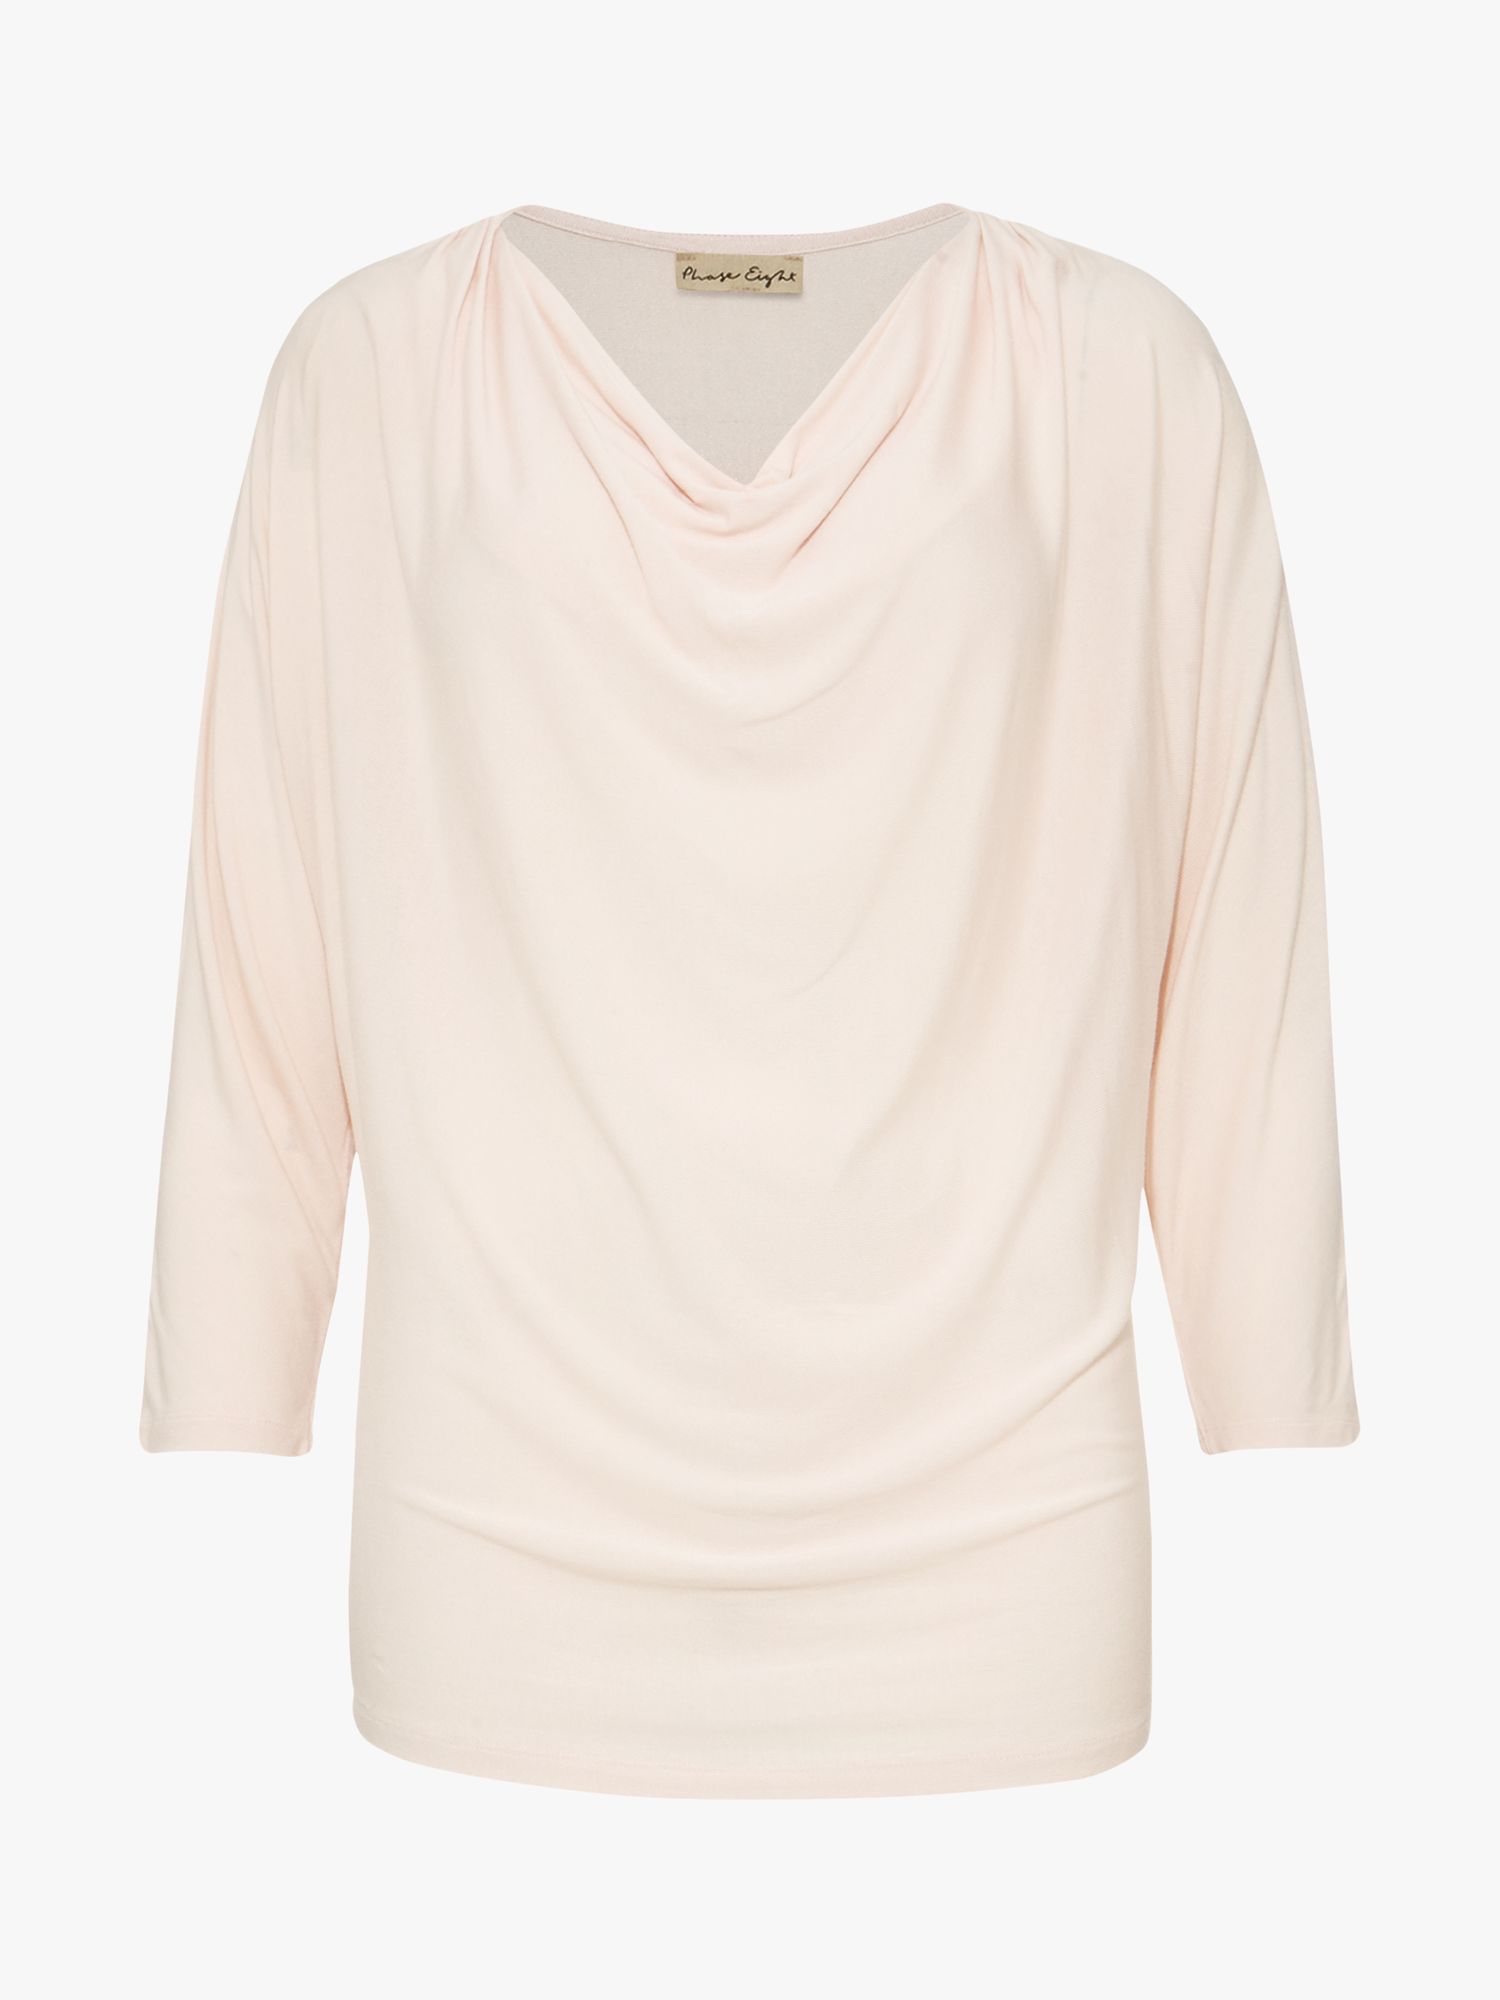 Phase Eight Morgan Cowl Neck Top, Pale Pink